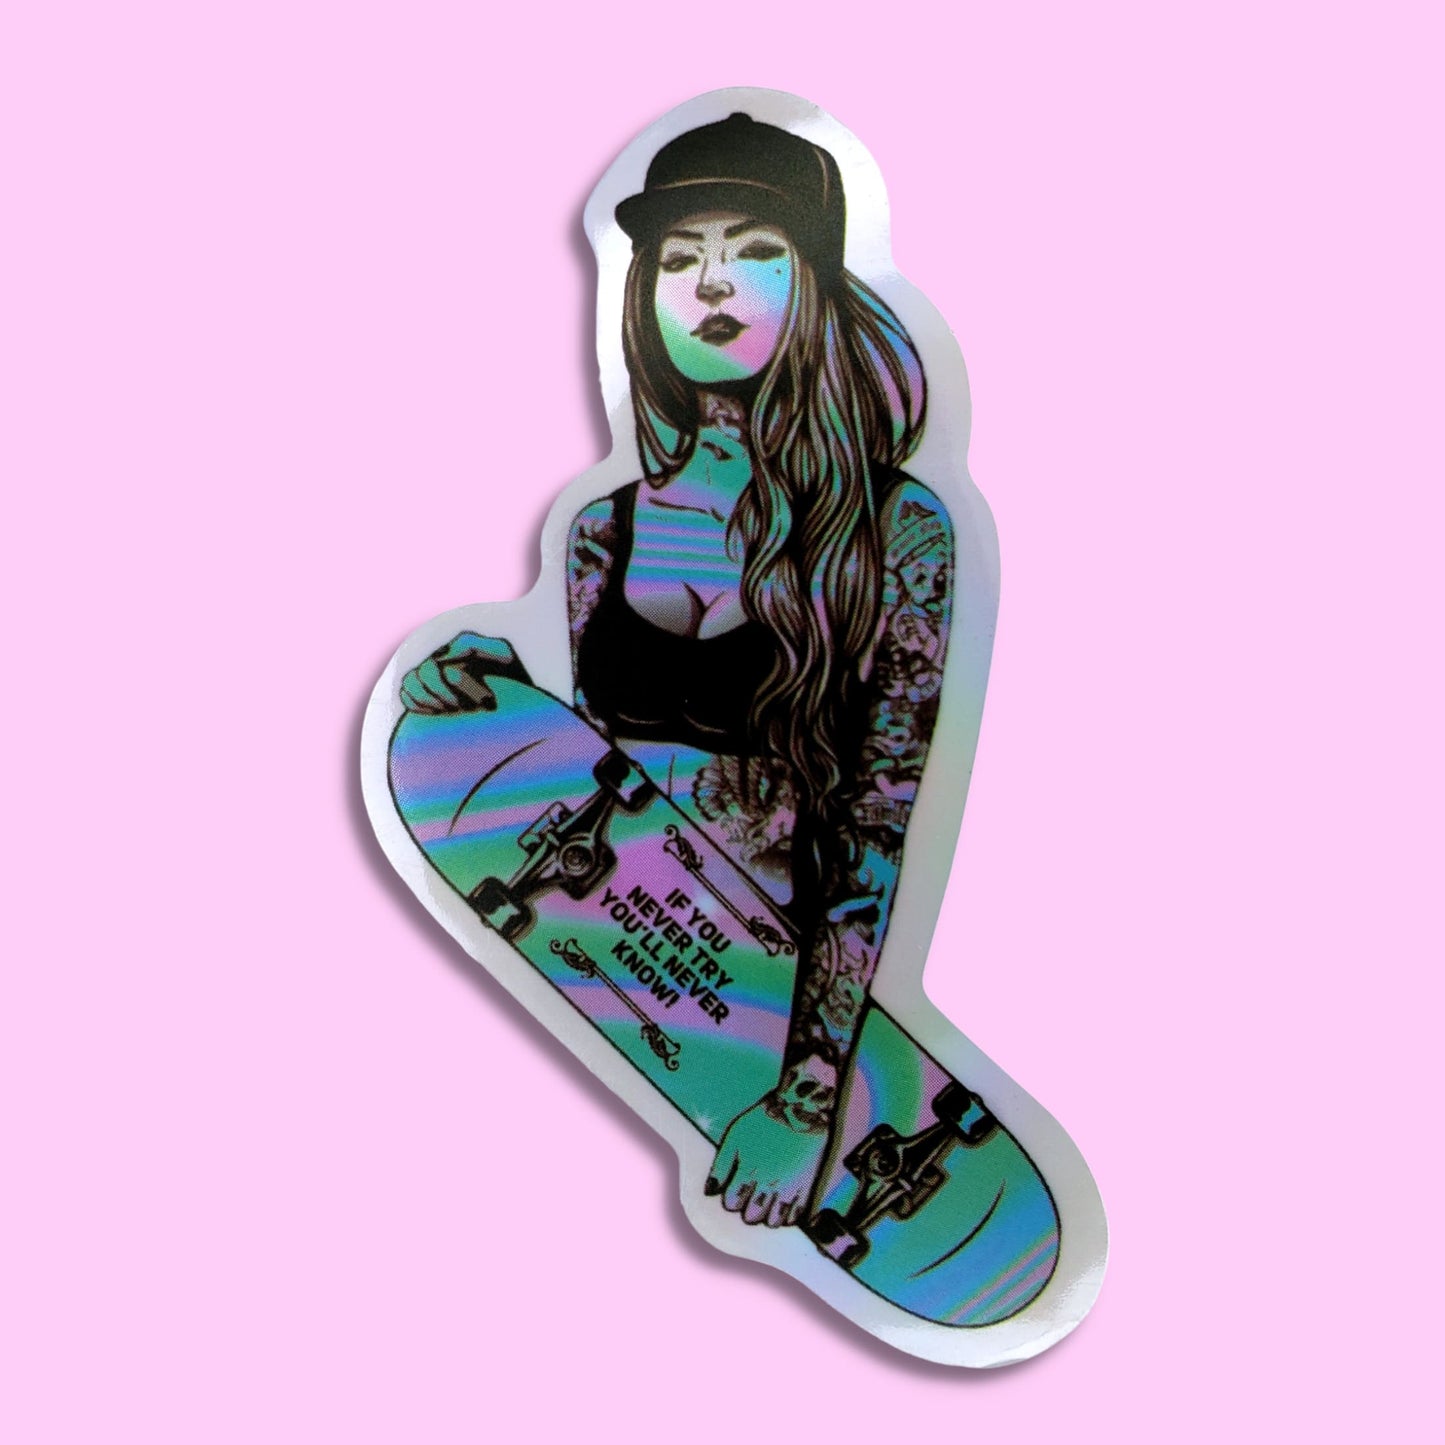 If You Never Try You'll Never Know Skater Girl Waterproof Holographic Sticker from Confetti Kitty, Only 1.0